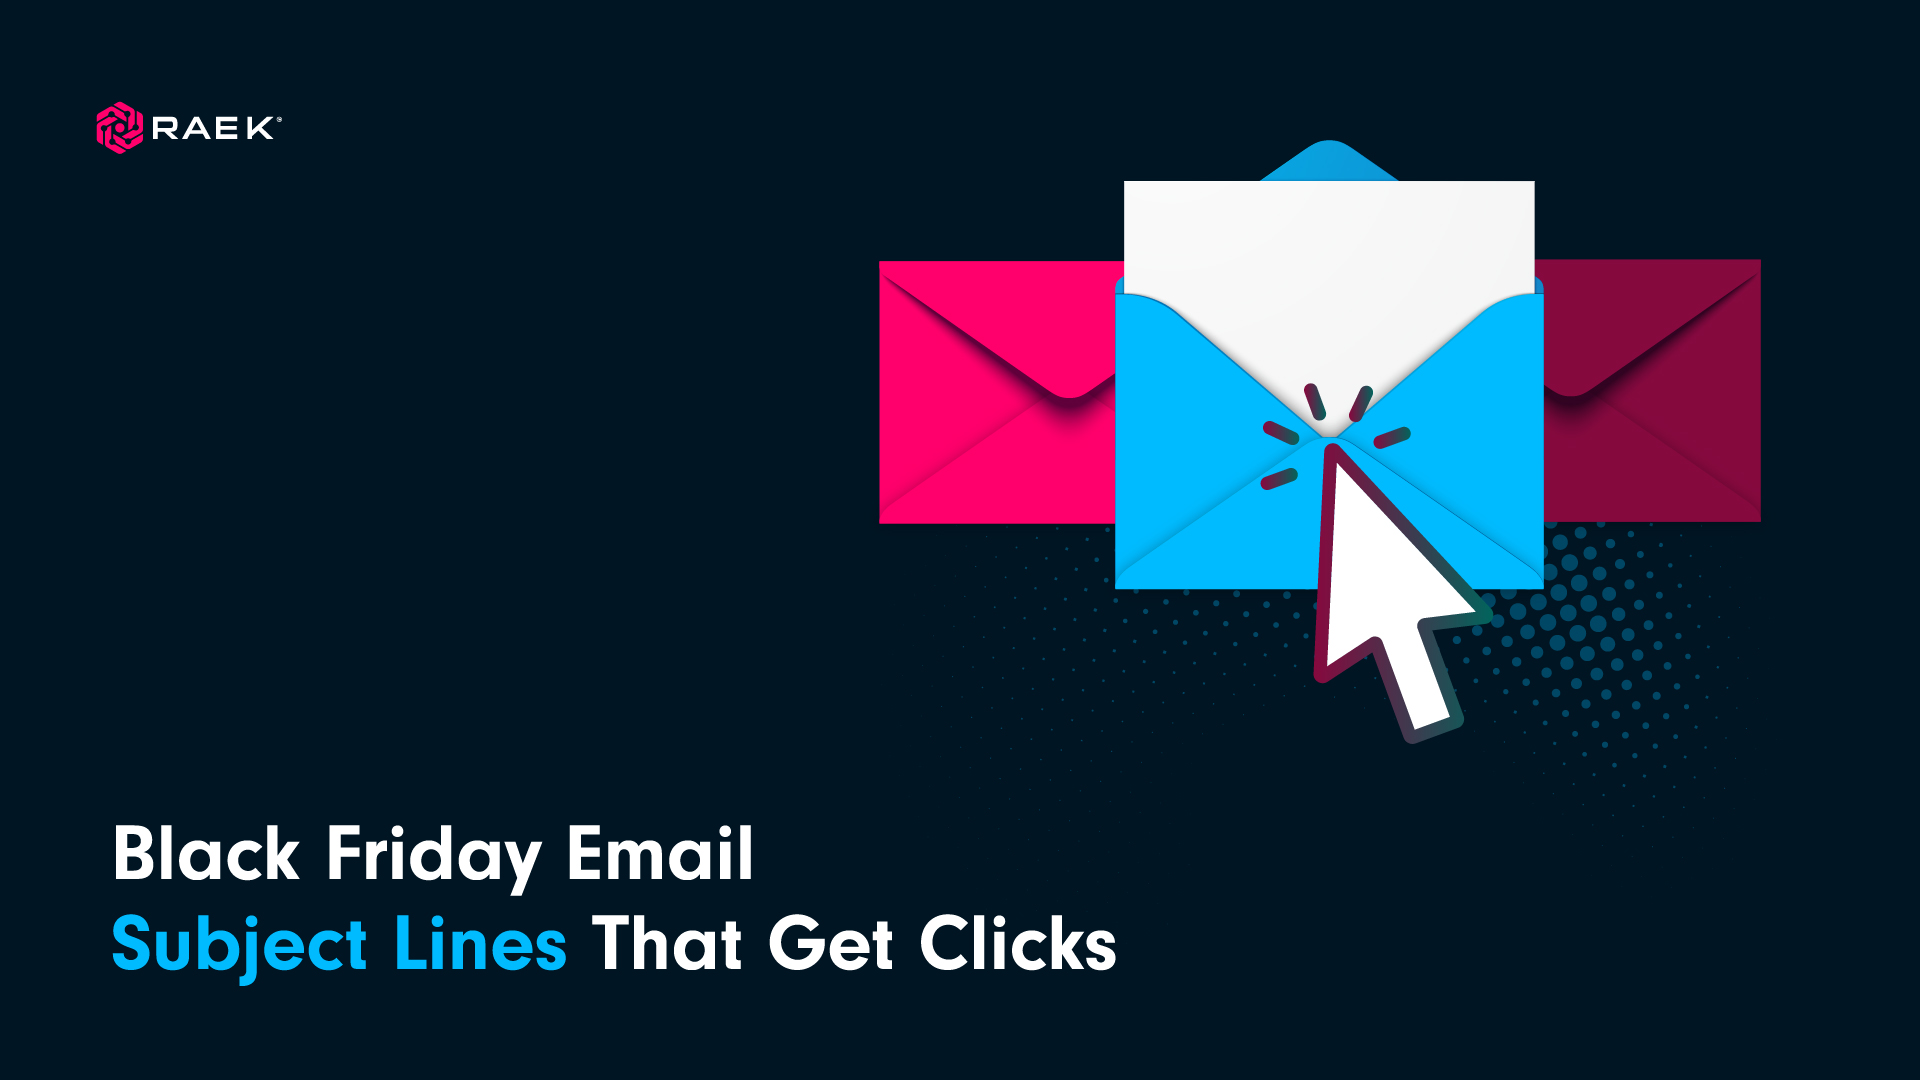 Black Friday Subject Lines that get clicks